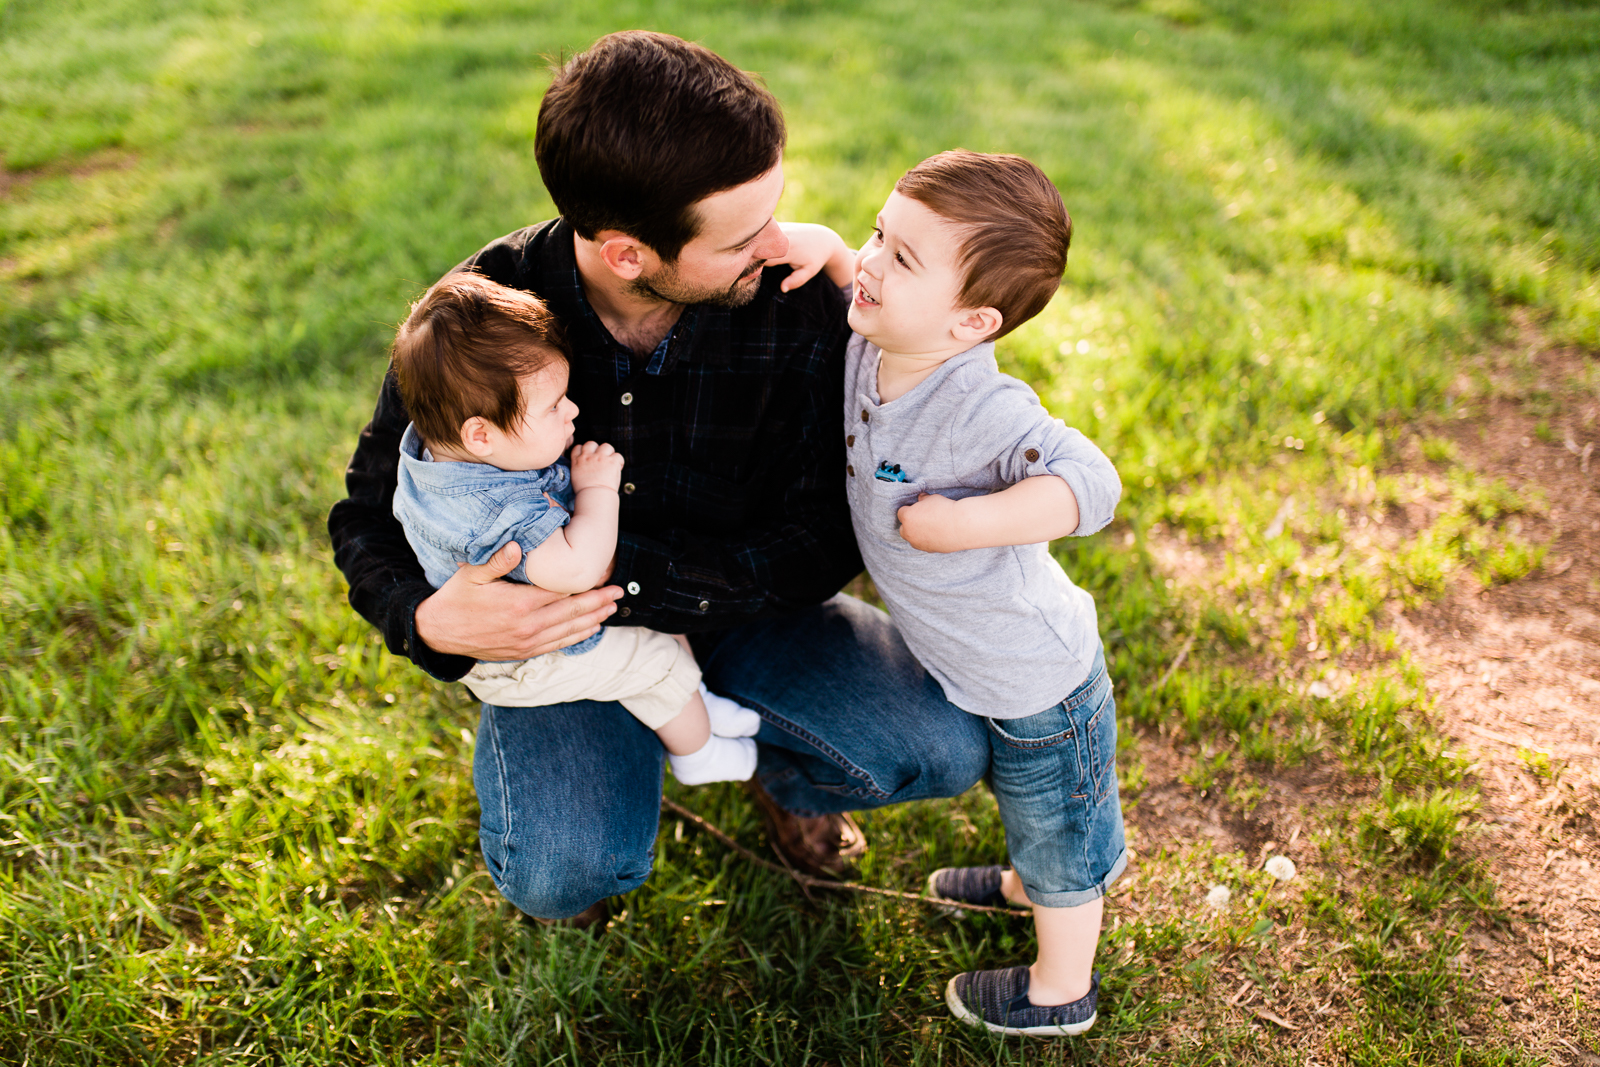  Father cuddles his sons in the evening light, Loose Park family session at golden hour, Kansas City lifestyle photographer, Rebecca Clair Photographer 